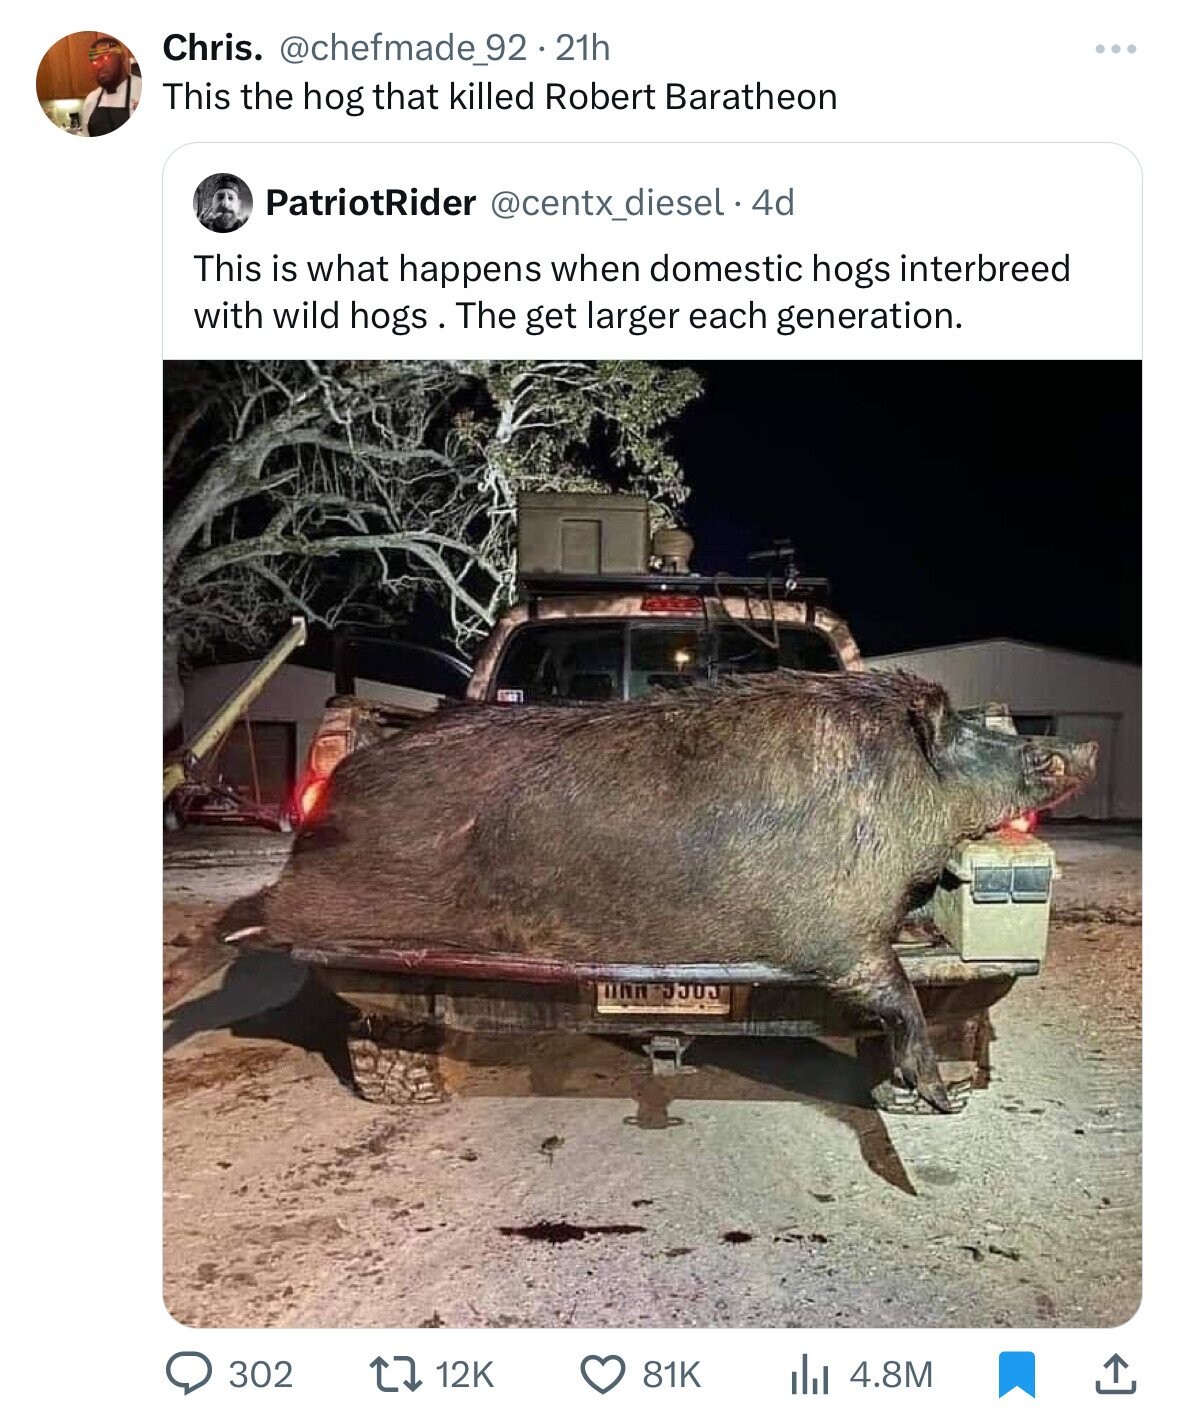 fauna - Chris. 21h This the hog that killed Robert Baratheon PatriotRider . 4d This is what happens when domestic hogs interbreed with wild hogs . The get larger each generation. Manu 81K il4.8M